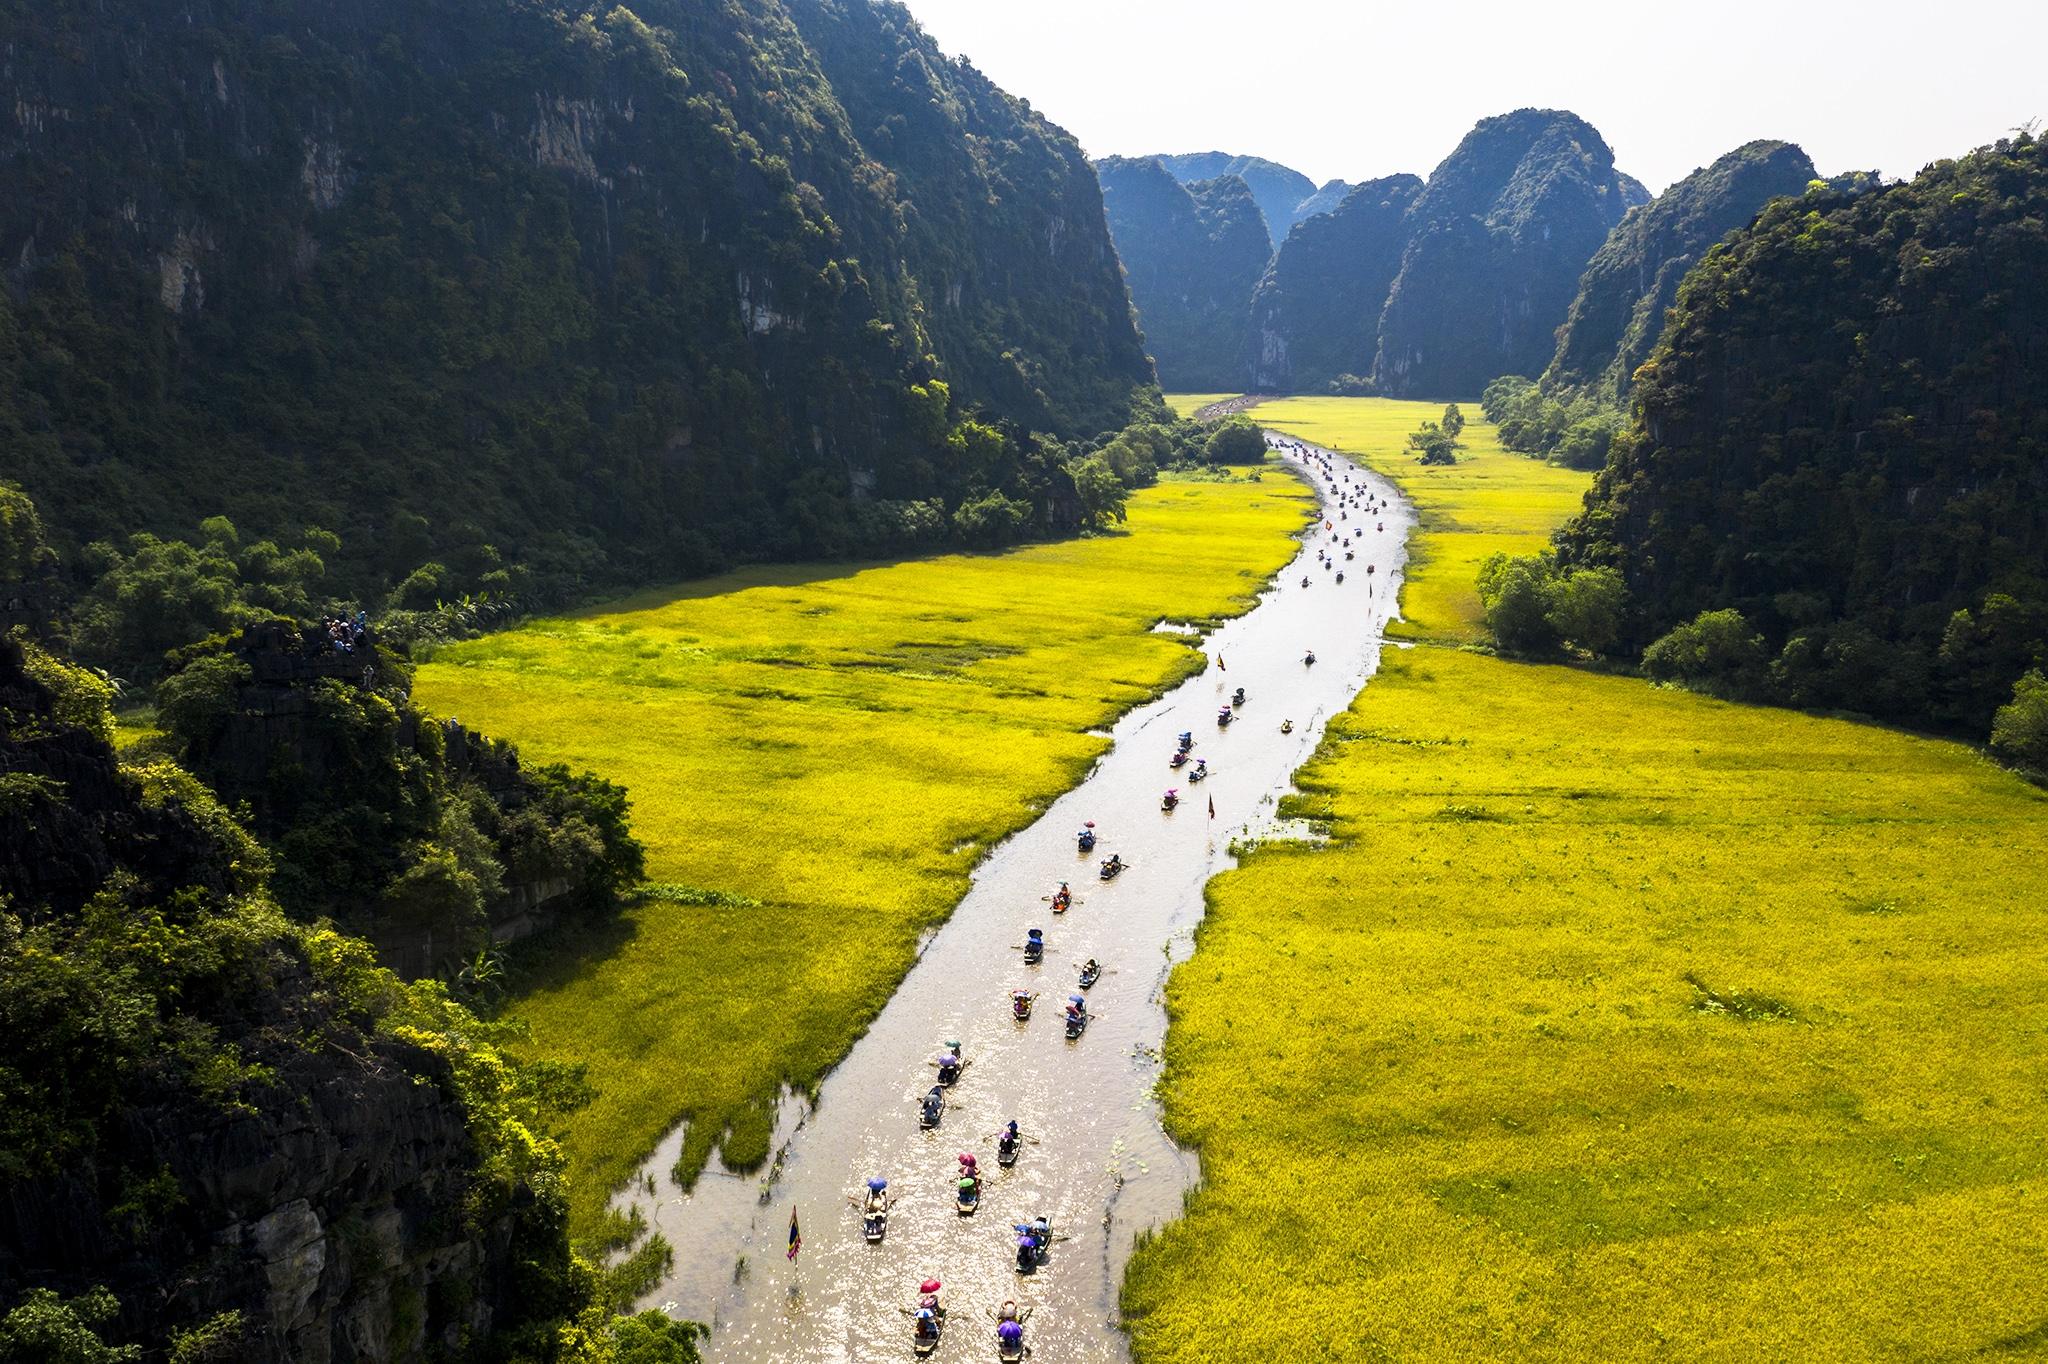 Explore Hoa Lu, Tam Coc, and Mua Cave 1 Day Excursion from Hanoi